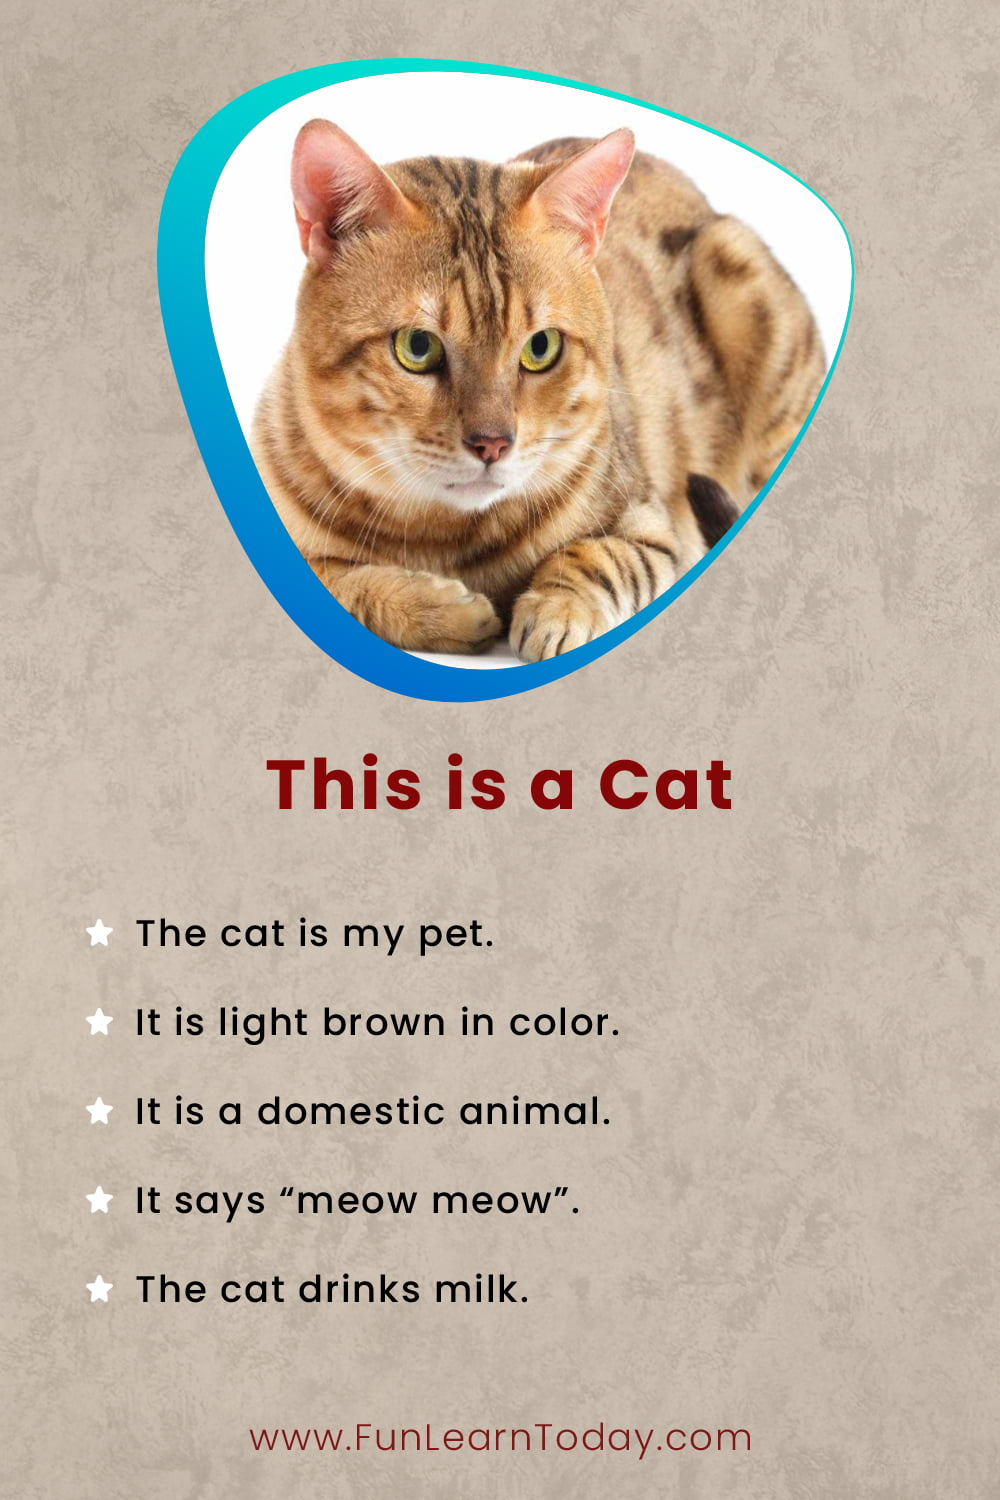 This is a cat